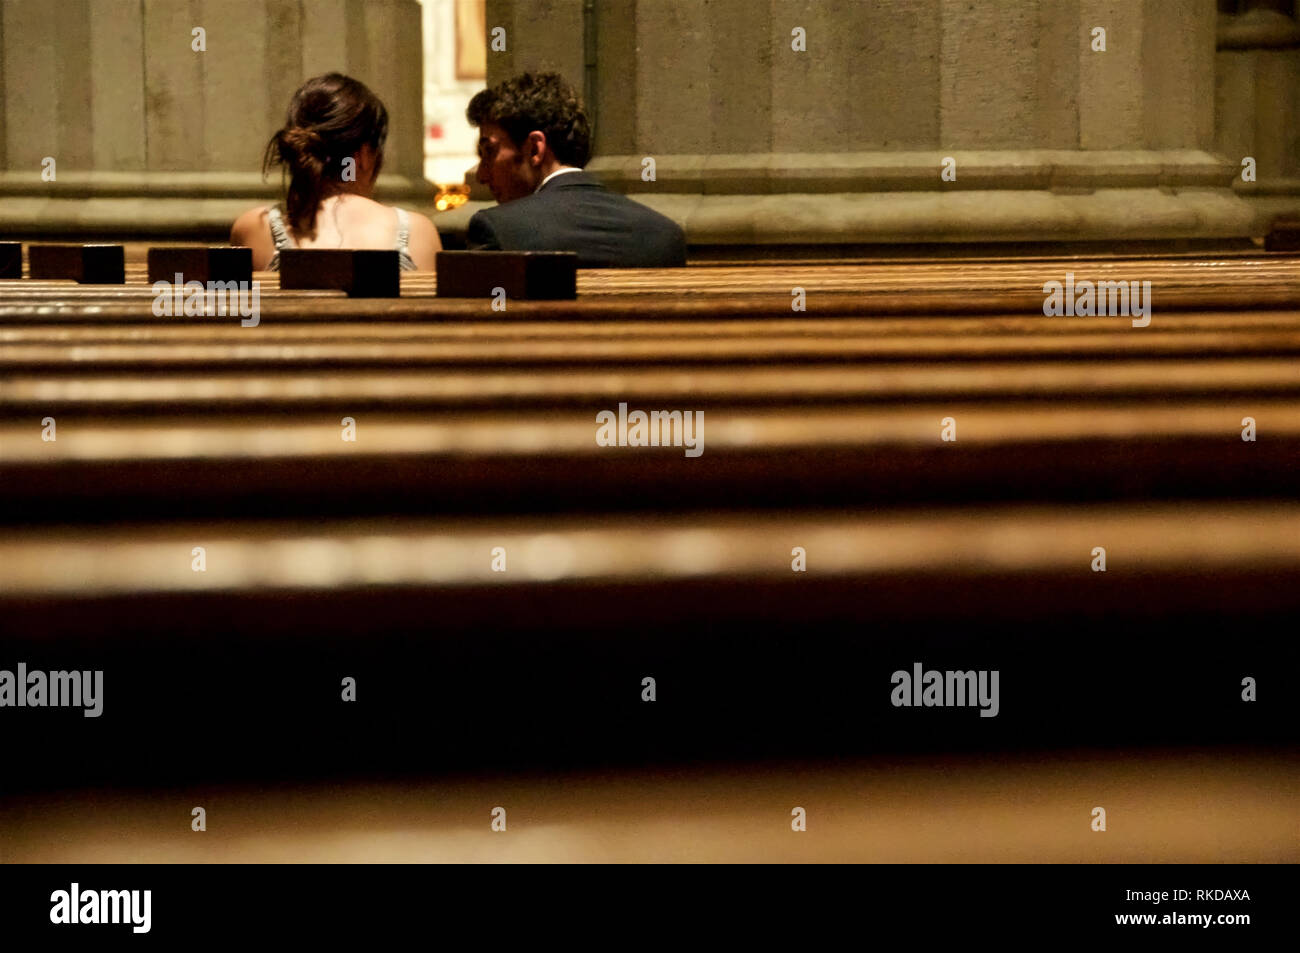 A man and a woman huddled and engaging in a hushed conversation between church pews. Stock Photo